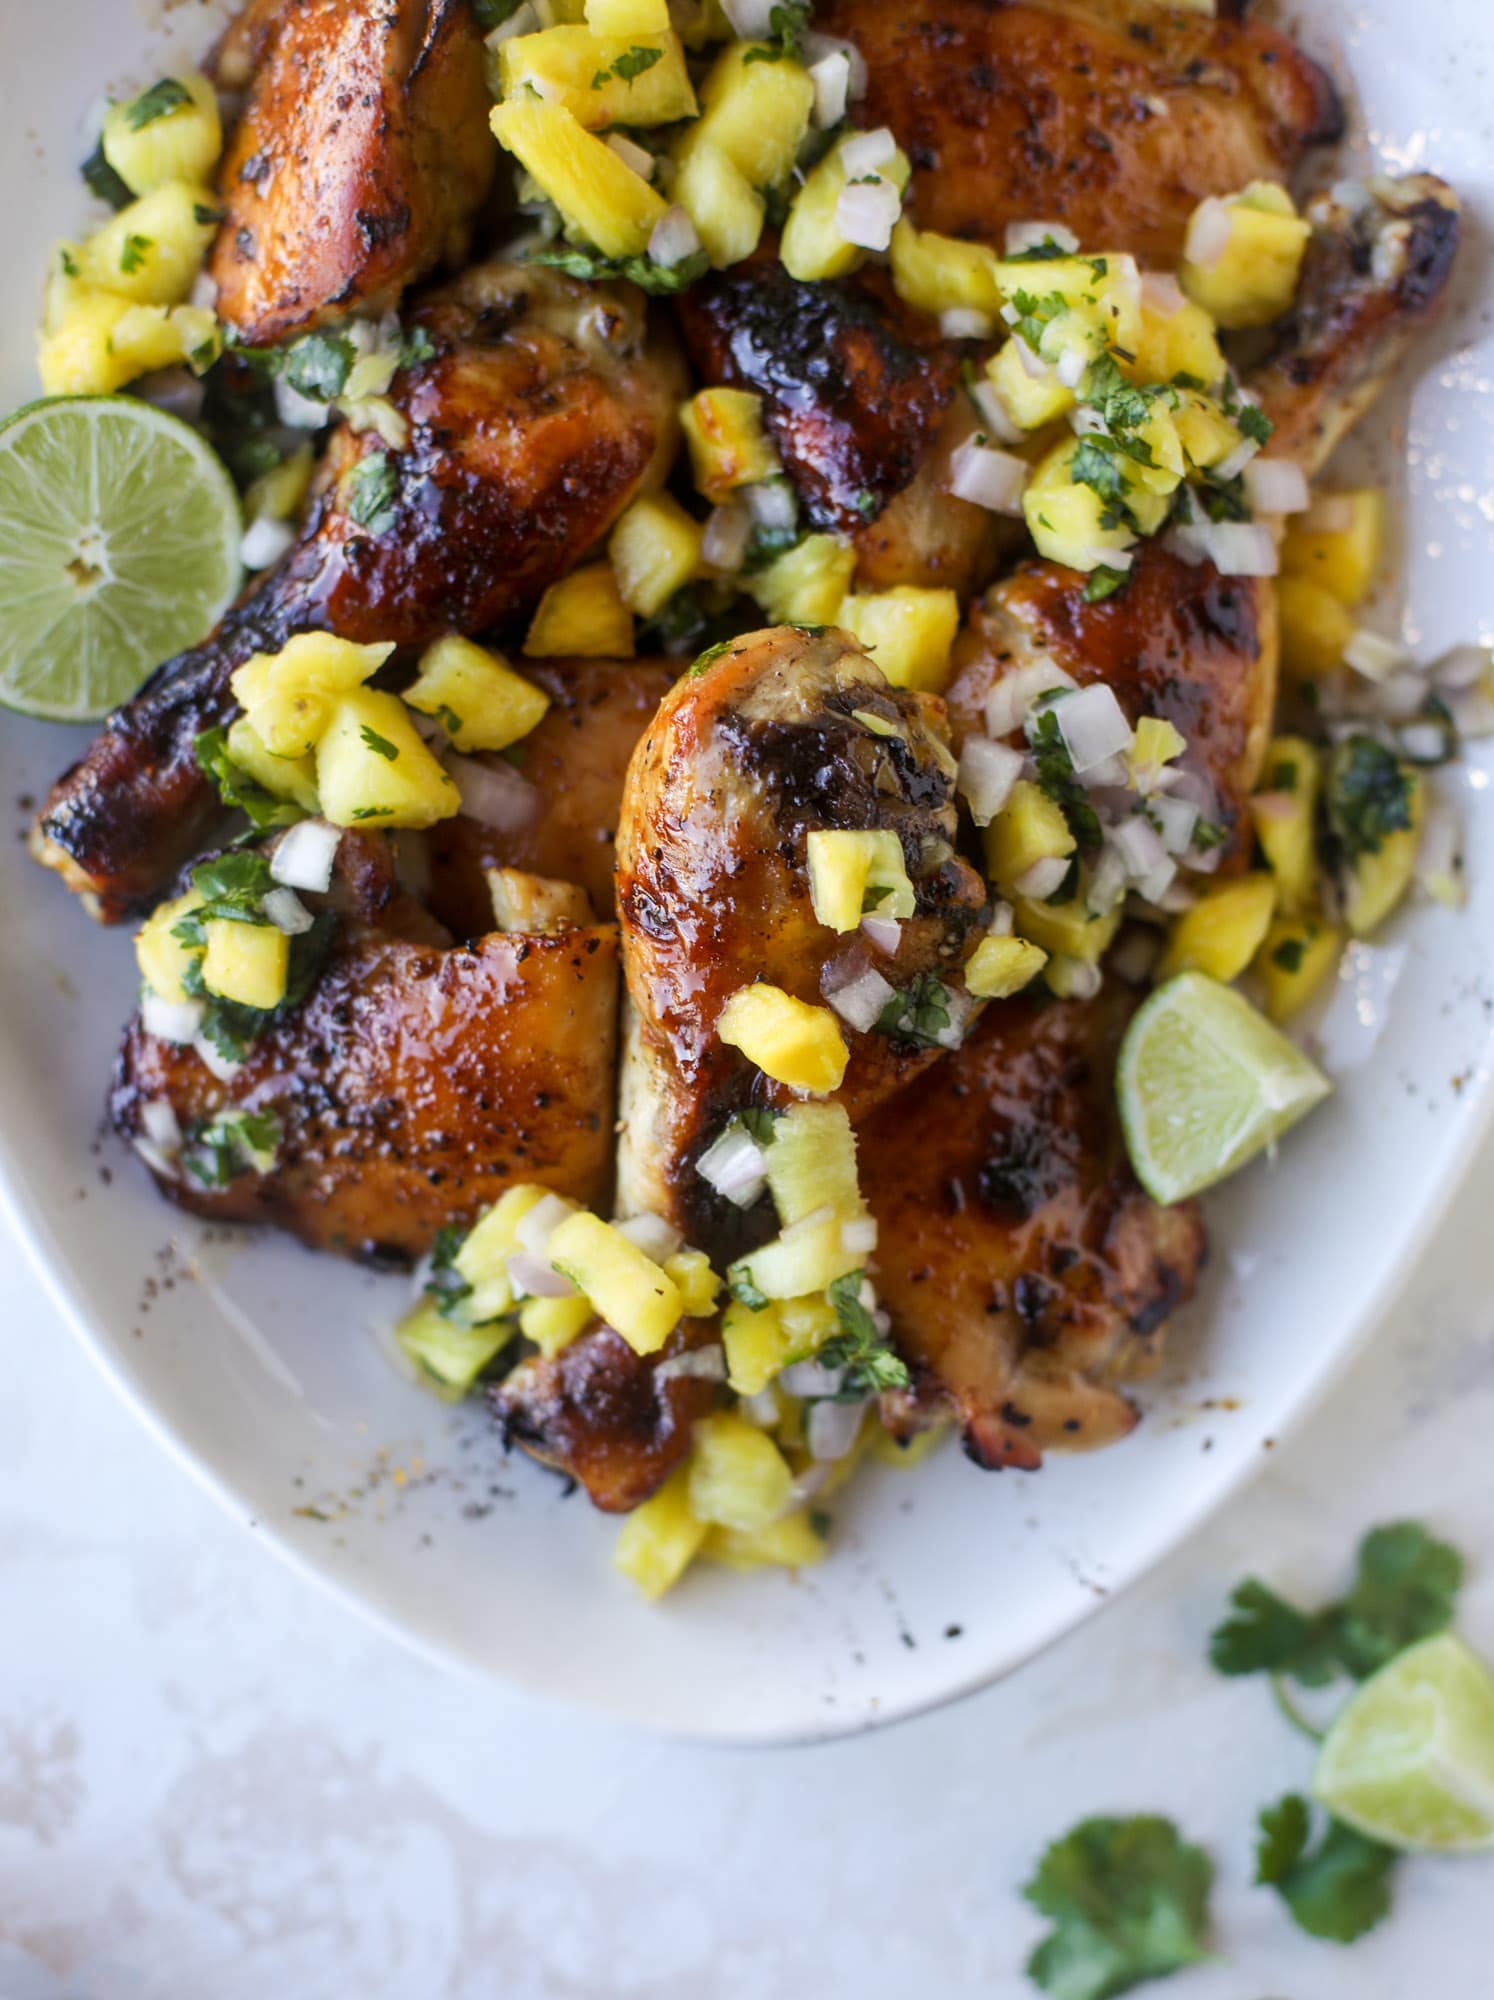 This sticky chicken recipe is made on a sheet pan and roasted until flavorfor and sticky with sauce, then served with pineapple salsa. It's the best! I howsweeteats.com #sticky #chicken